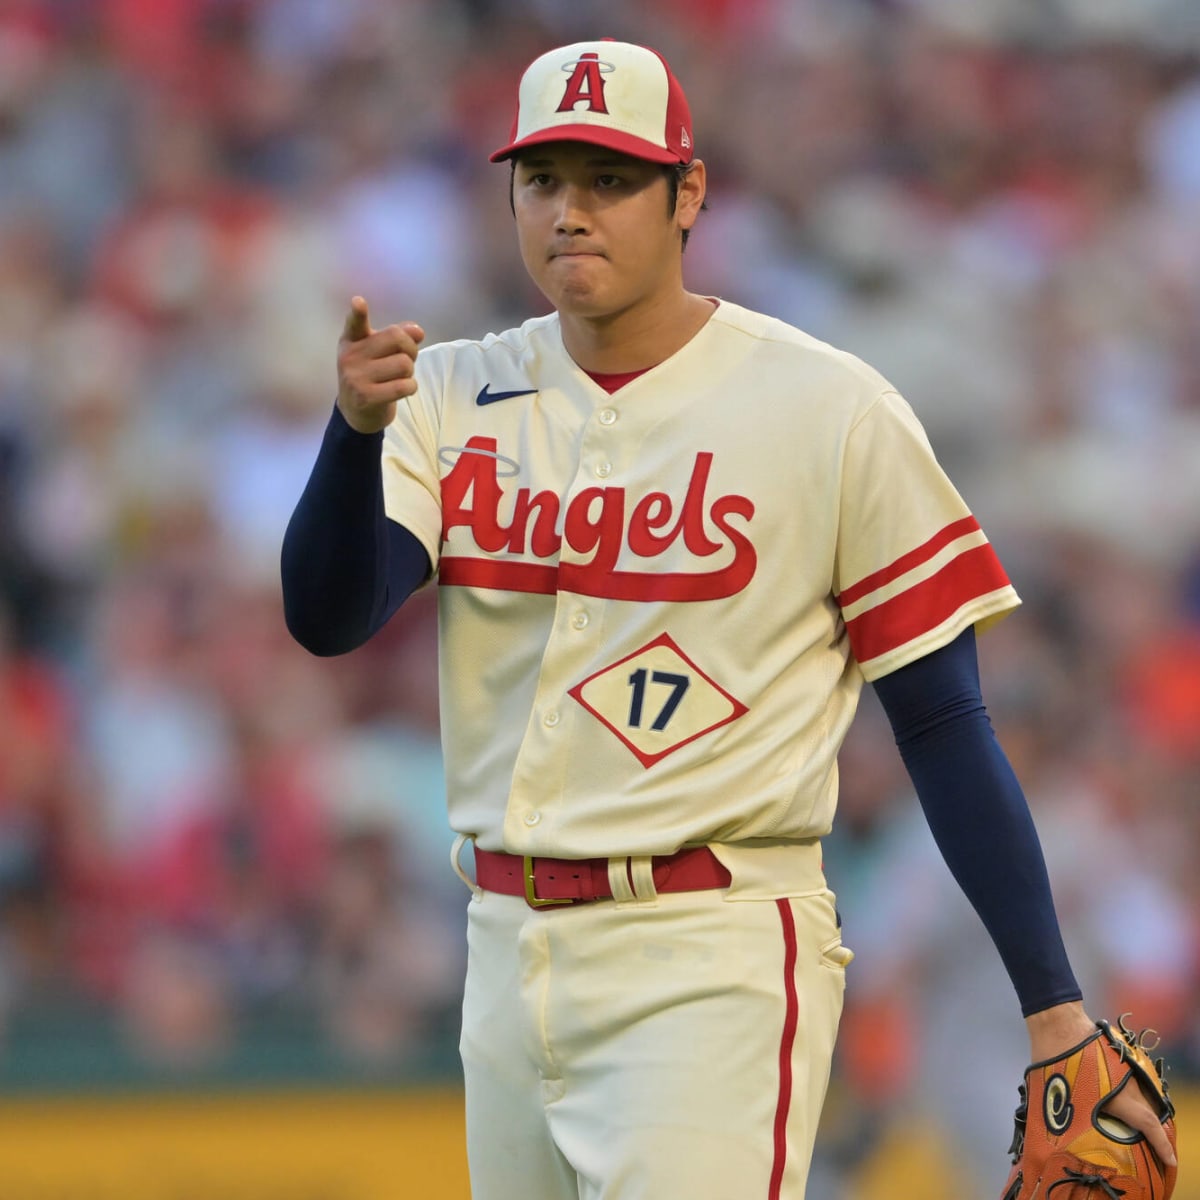 Shohei Ohtani leads the Angels inall the stats